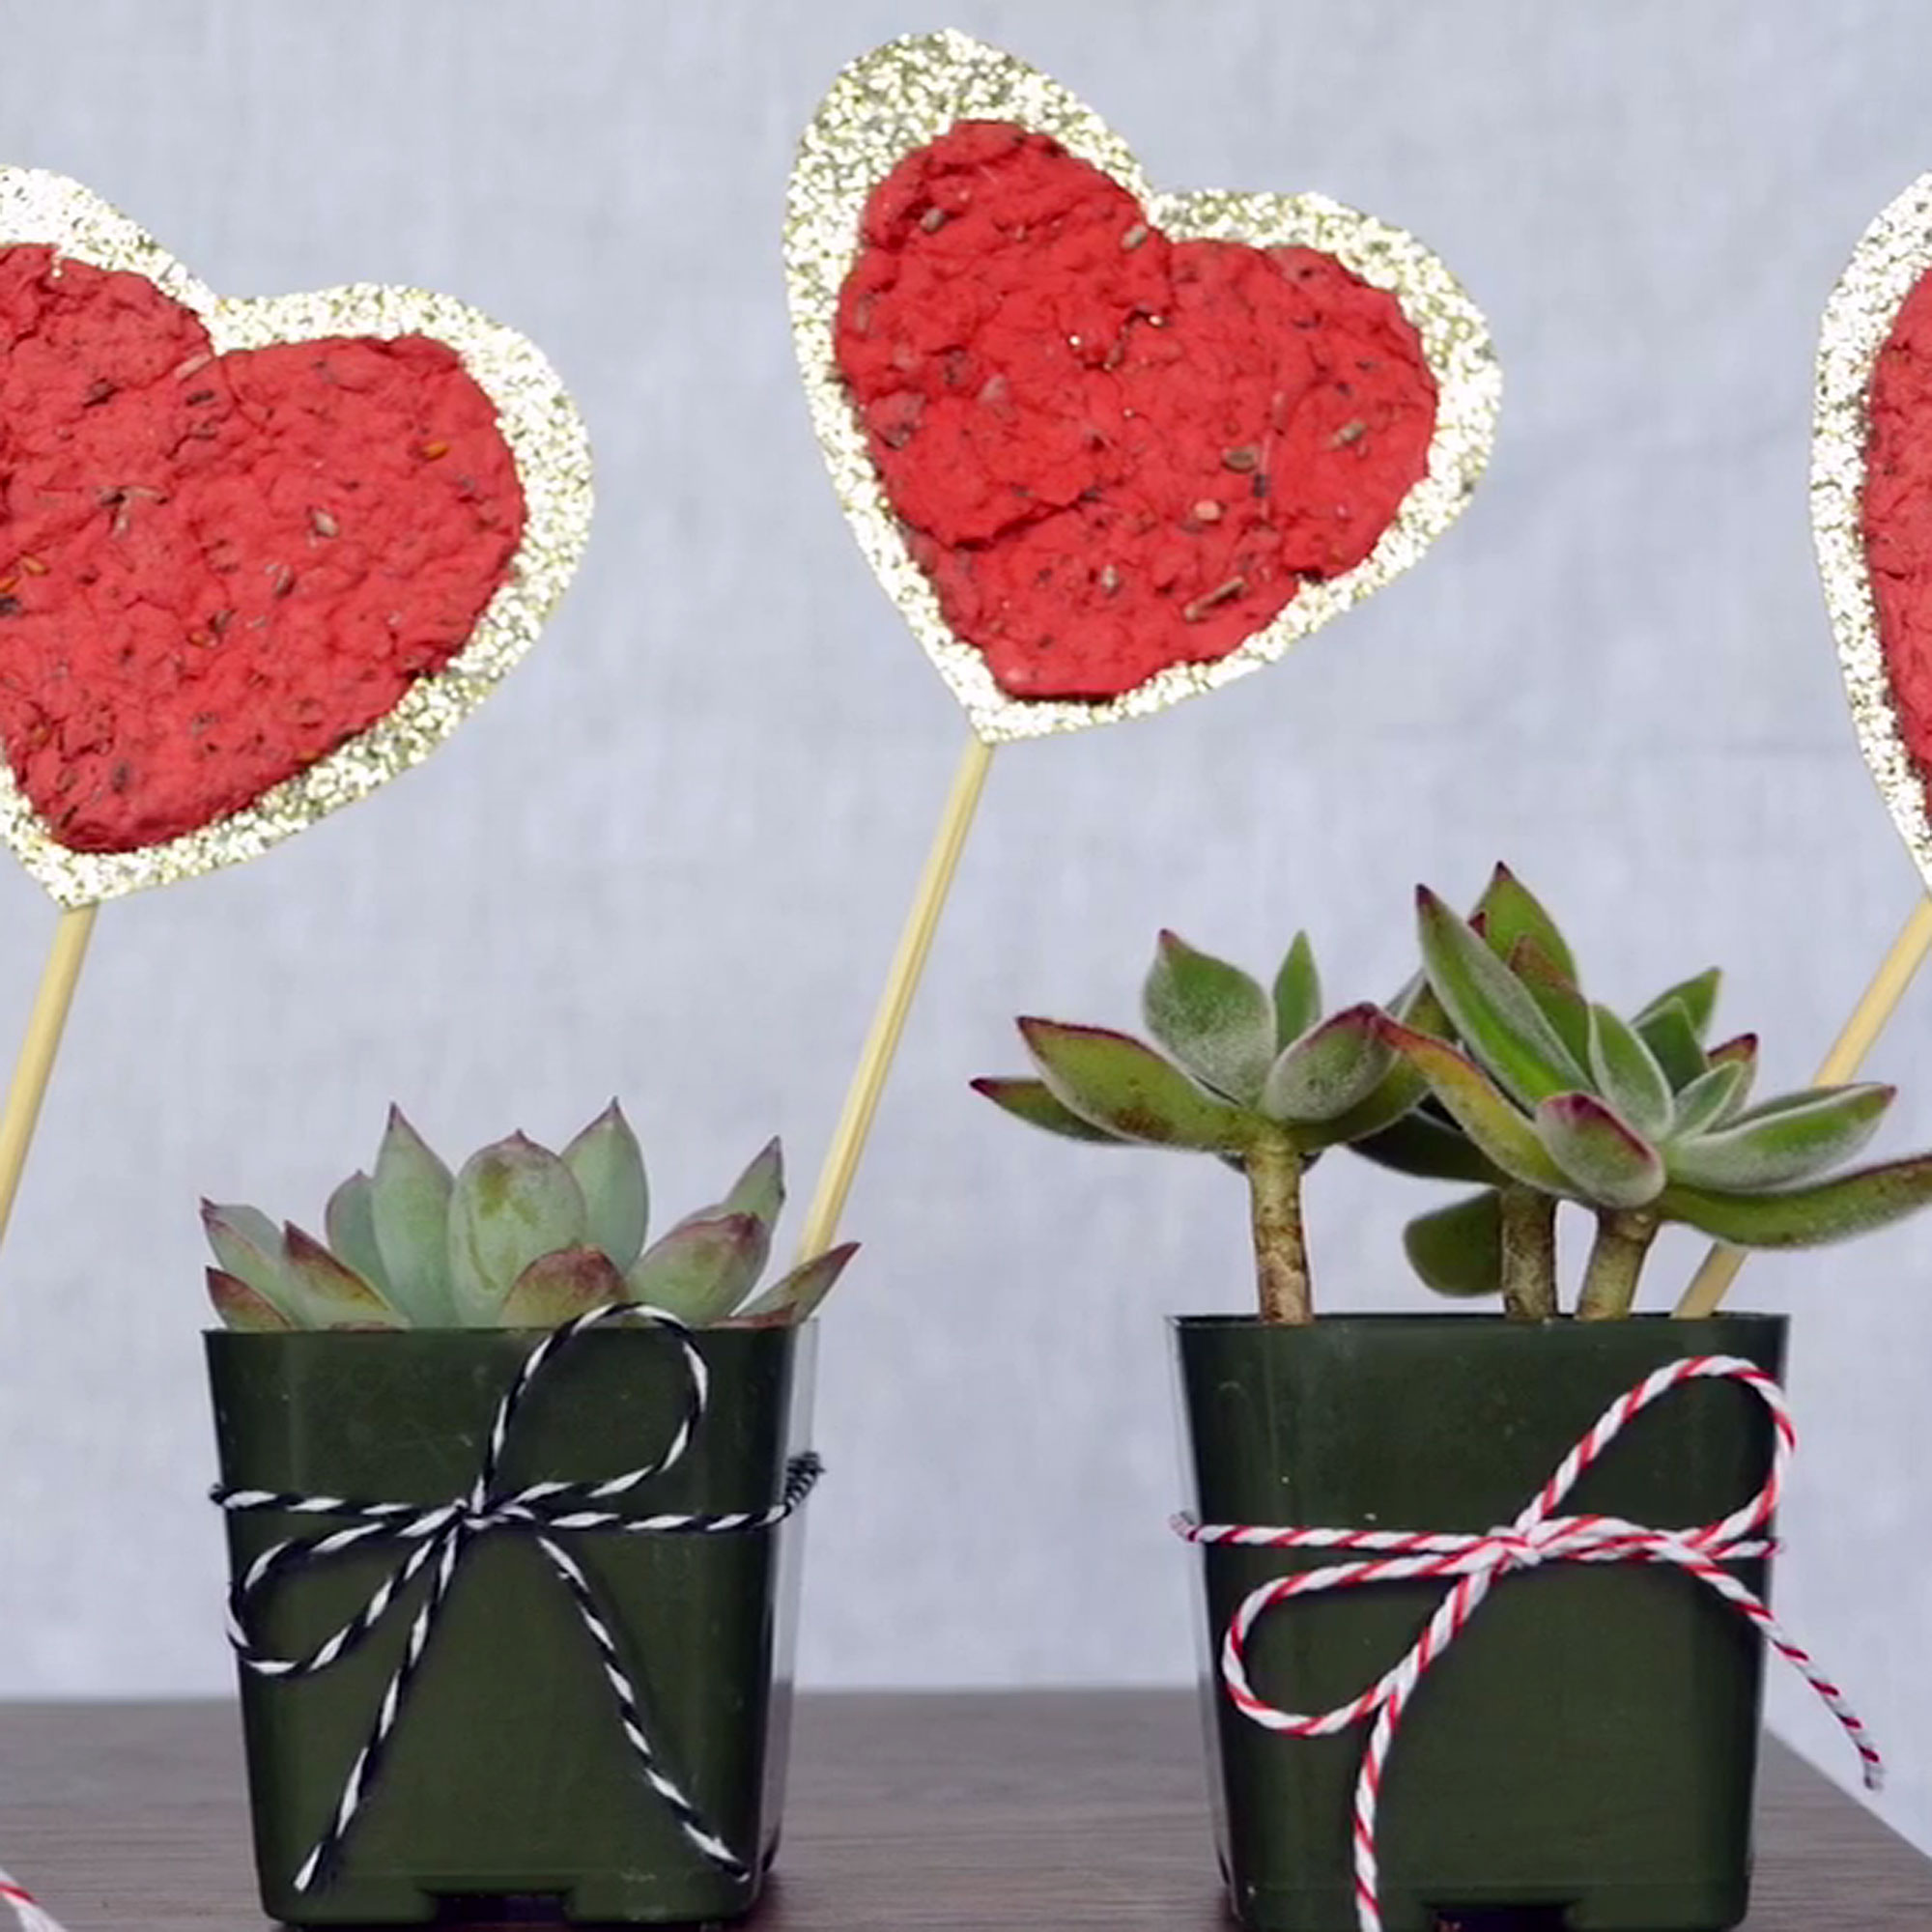 How to Make Seed Paper Hearts